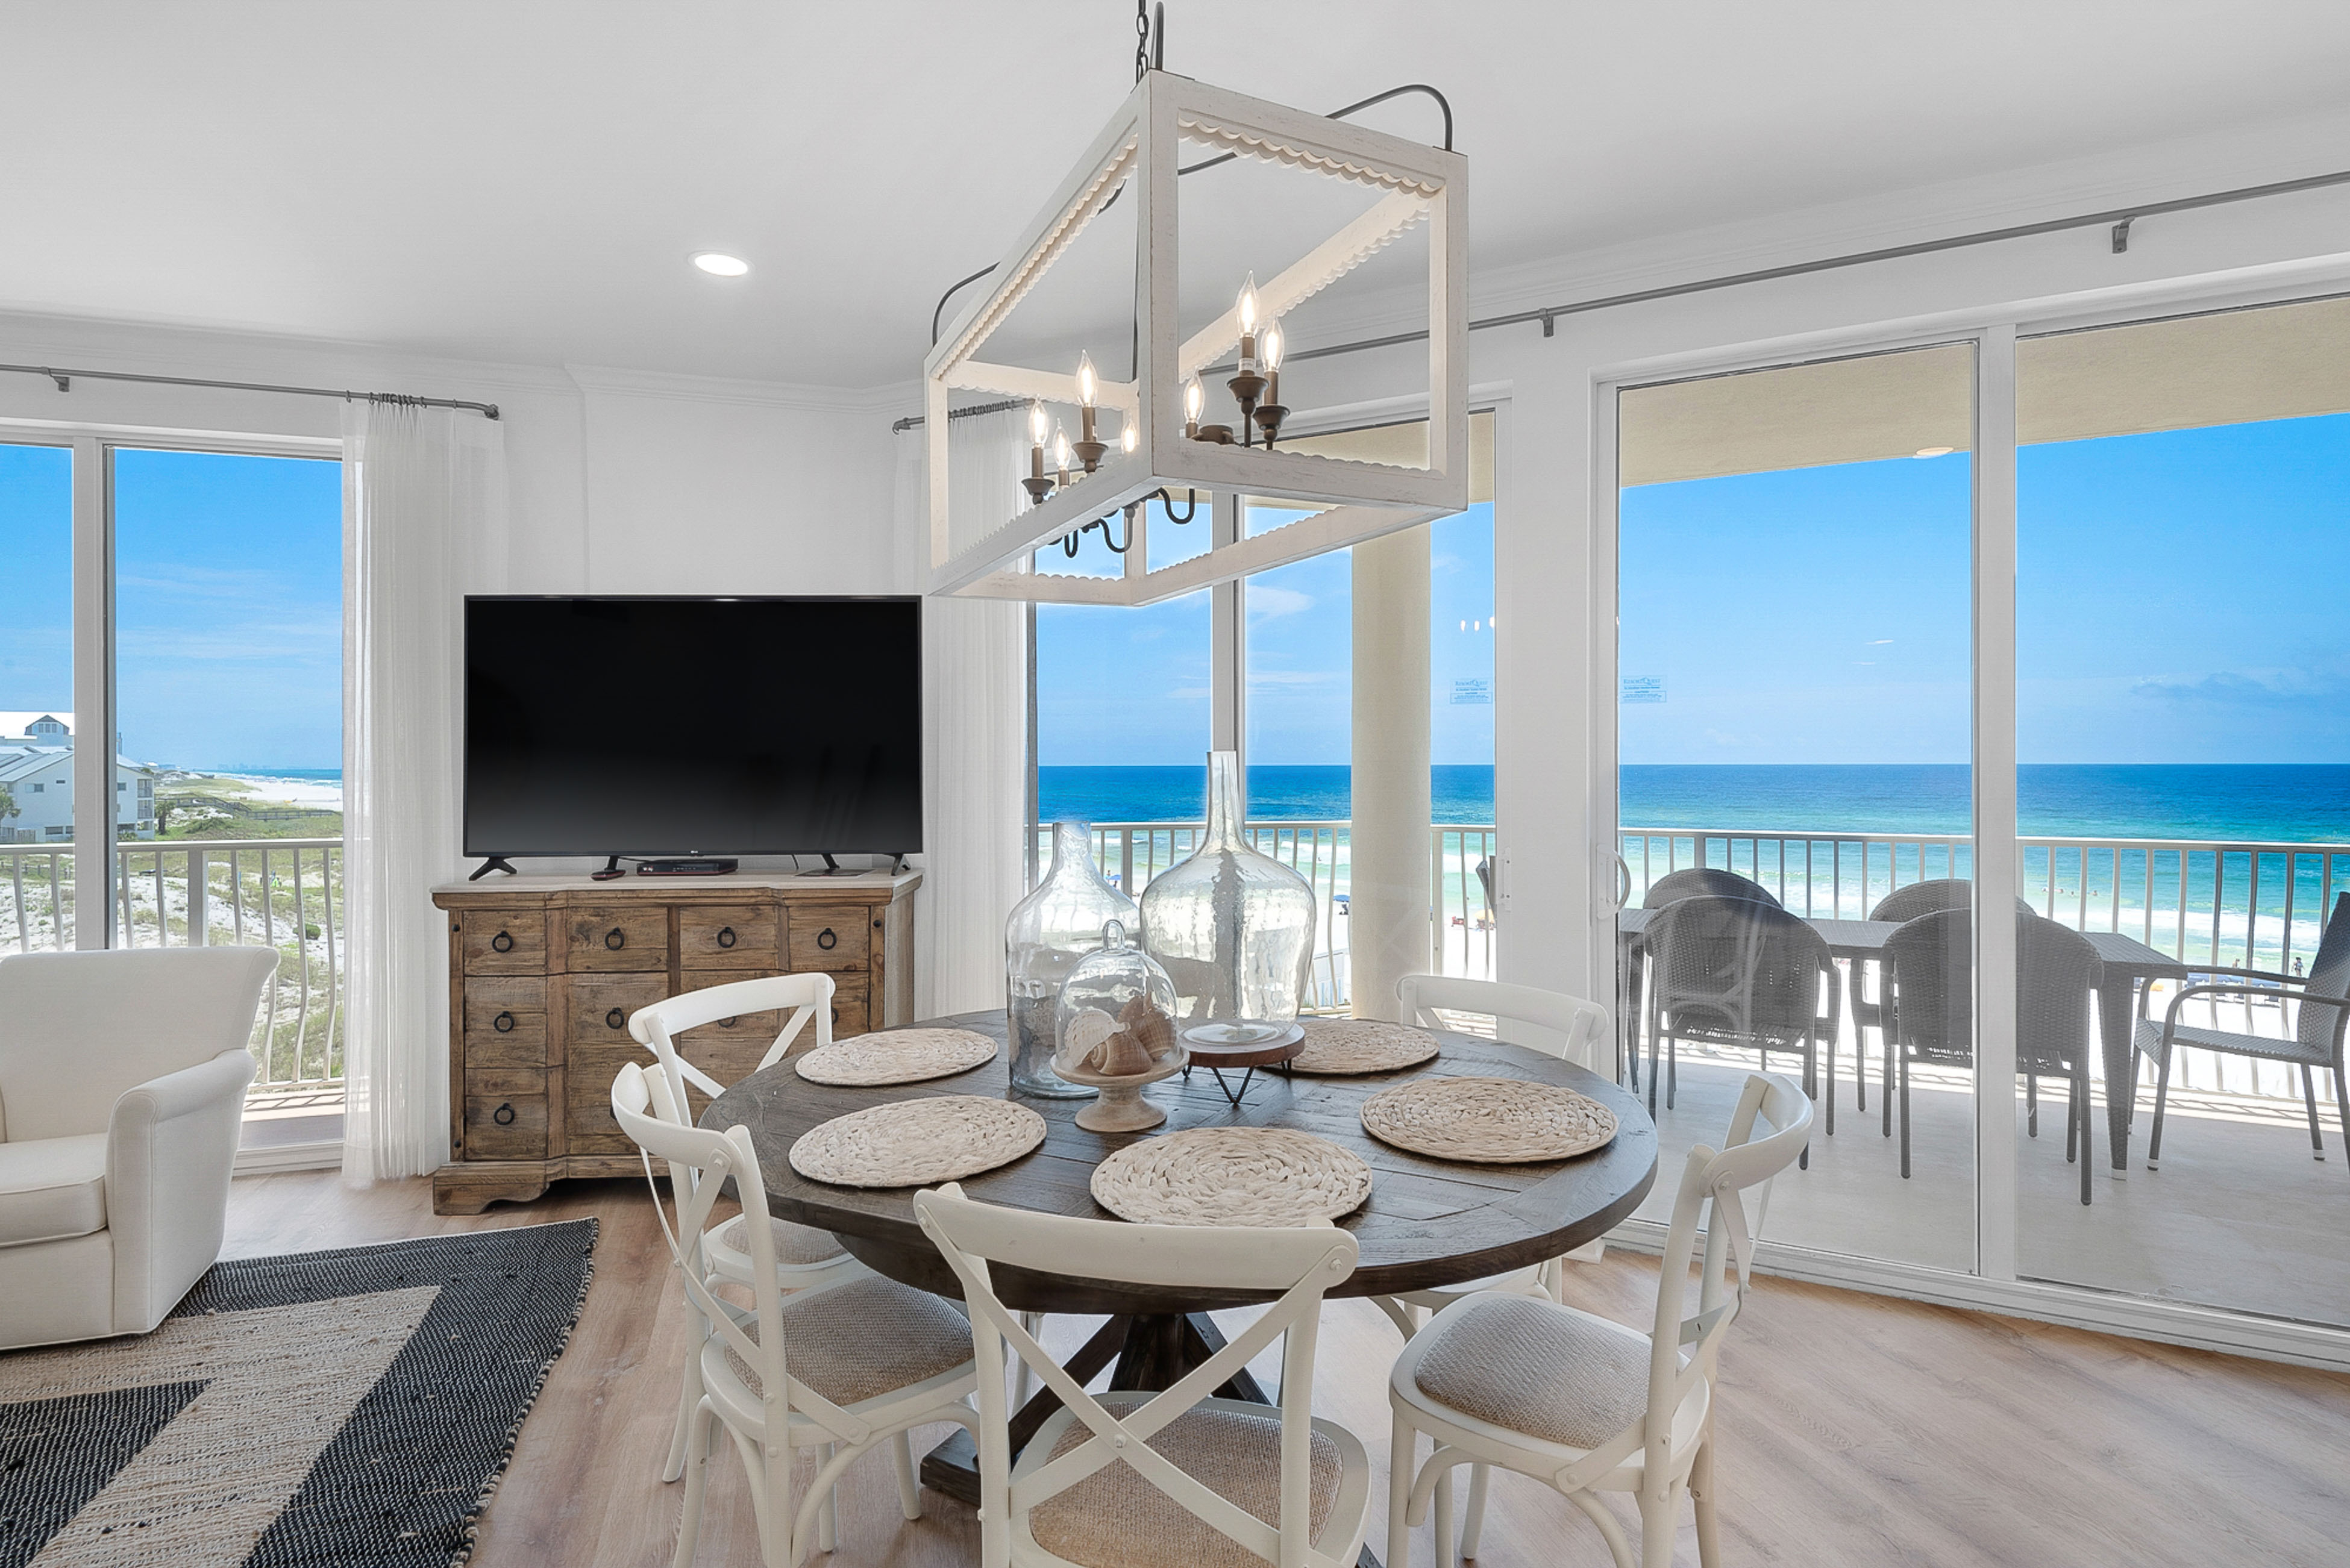 Dunes of Seagrove B305 Condo rental in Dunes of Seagrove in Highway 30-A Florida - #5